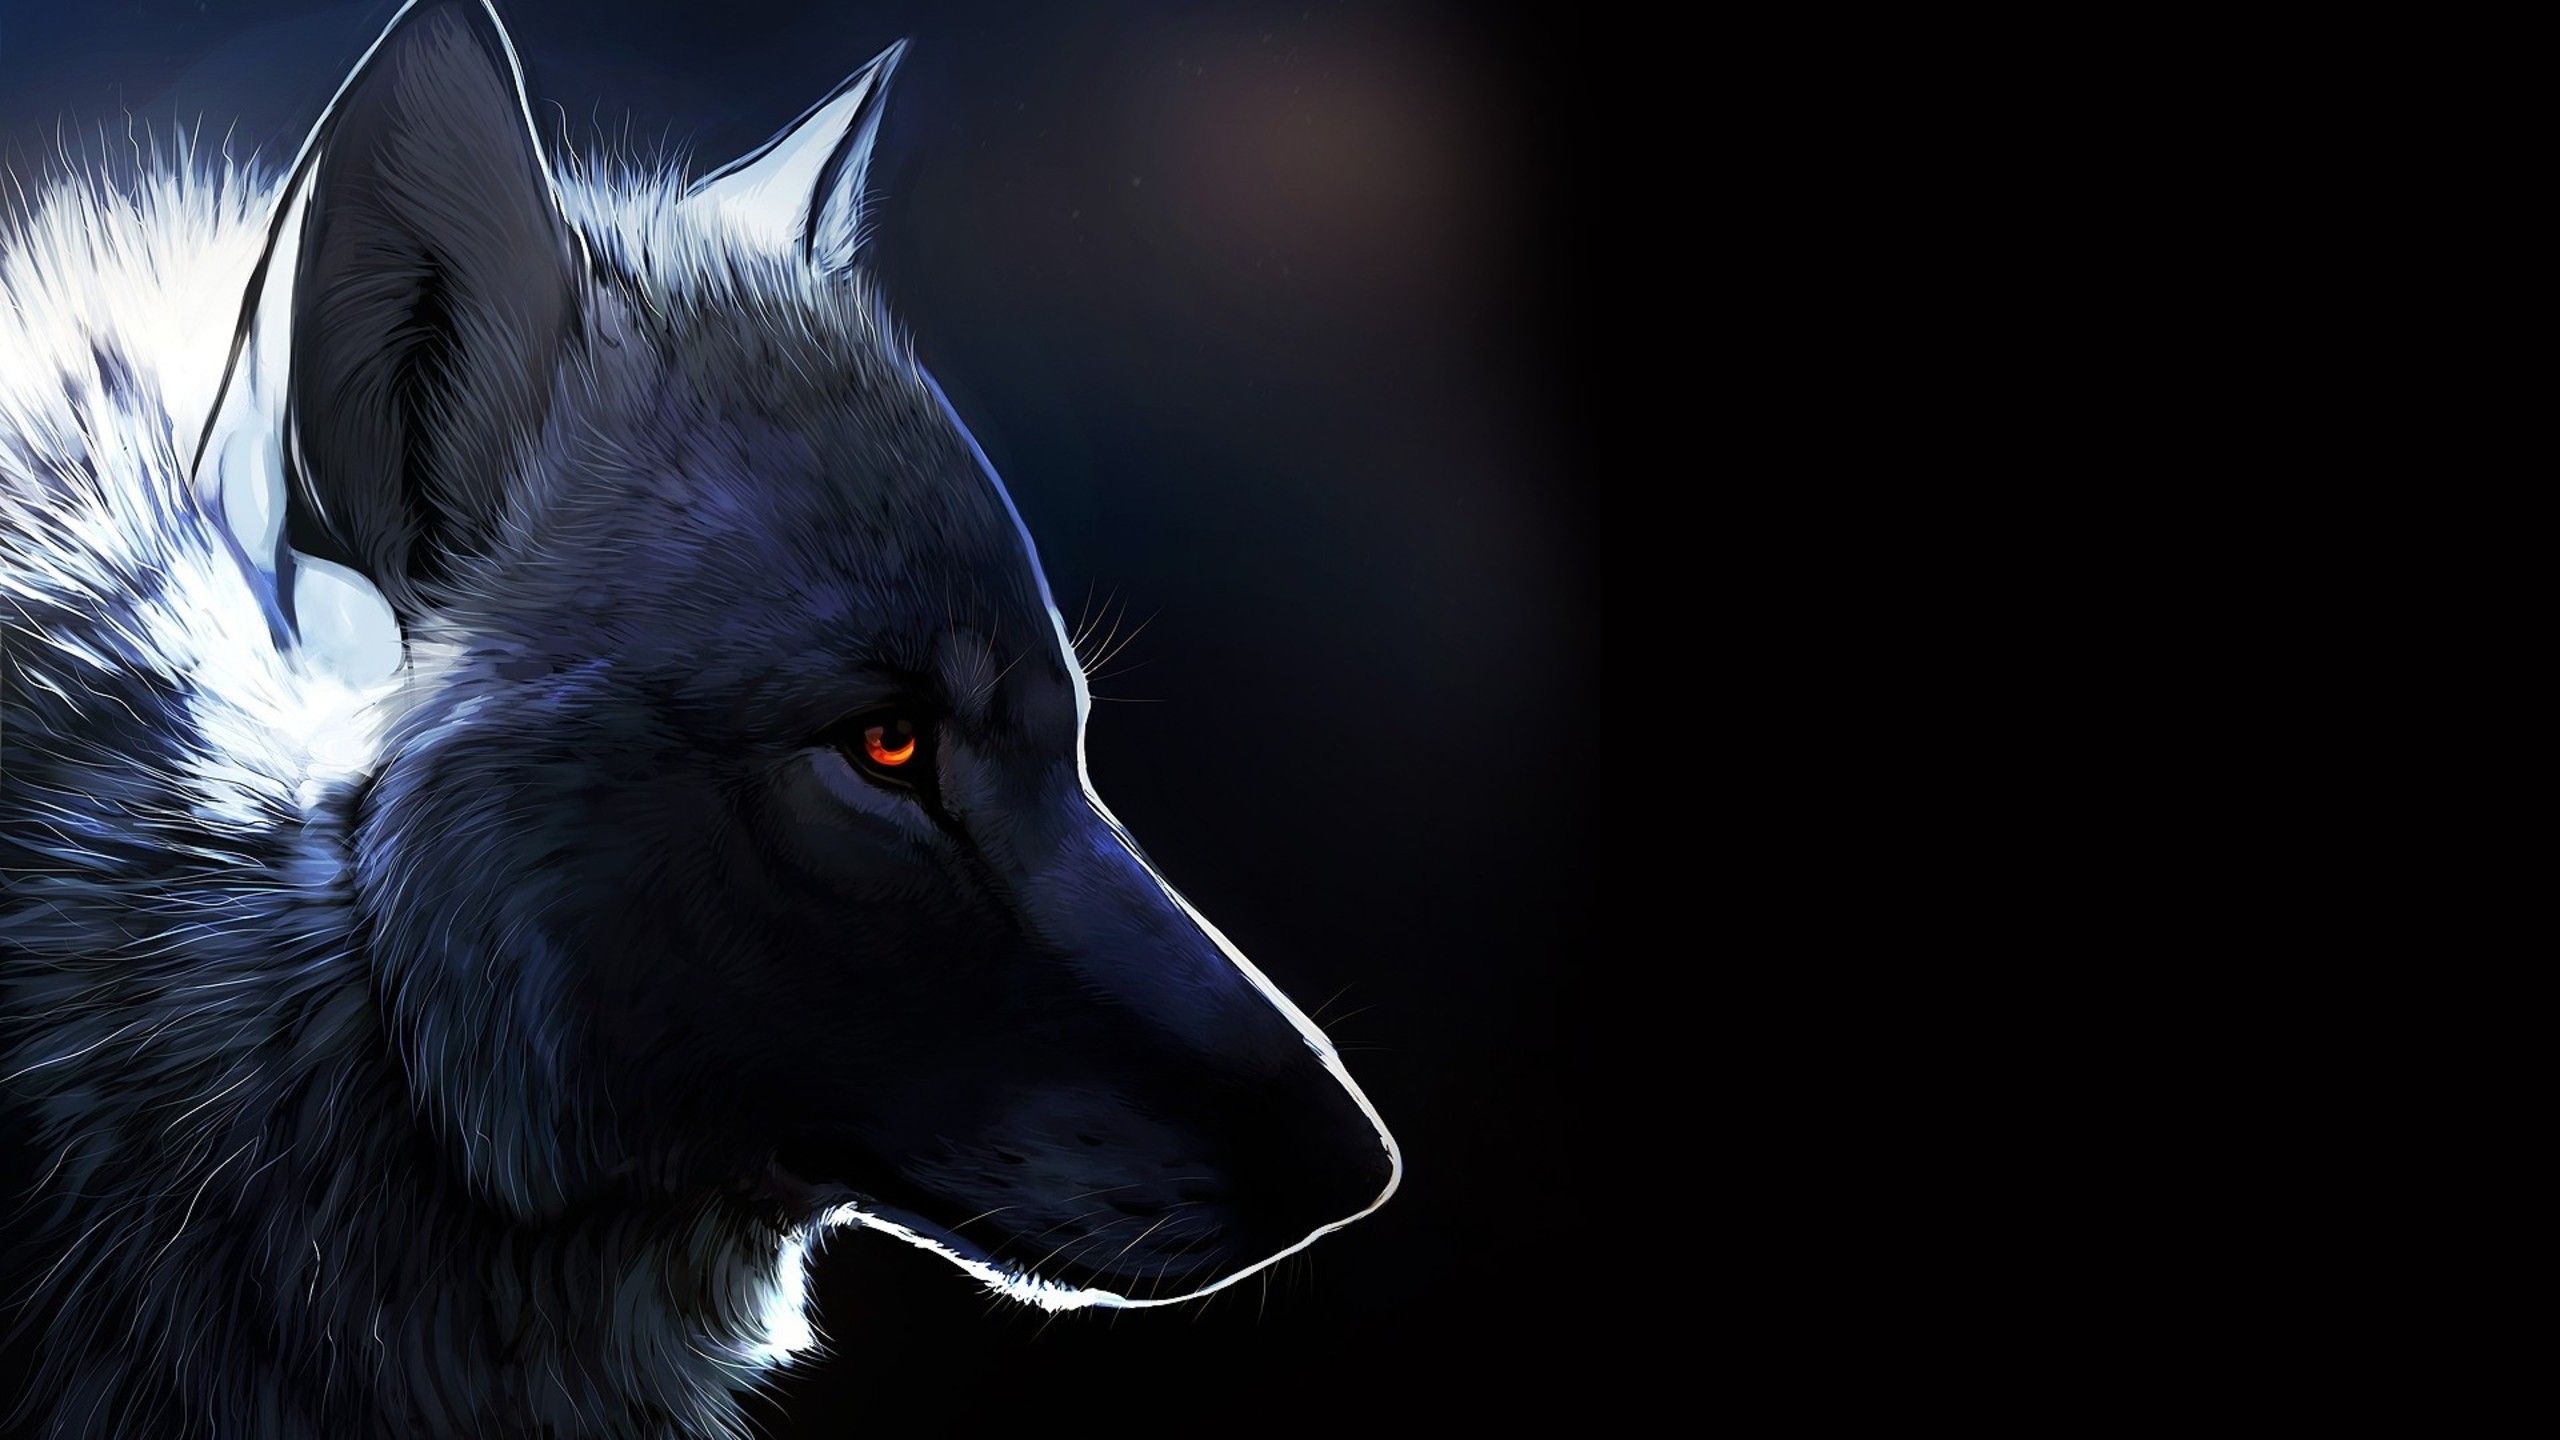 Wallpaper Download 2560x1440 Black wolf drawing creative wallpaper. Wild animals wallpaper. Animals Wallpap. Wolf wallpaper, Wolf background, Fantasy wolf